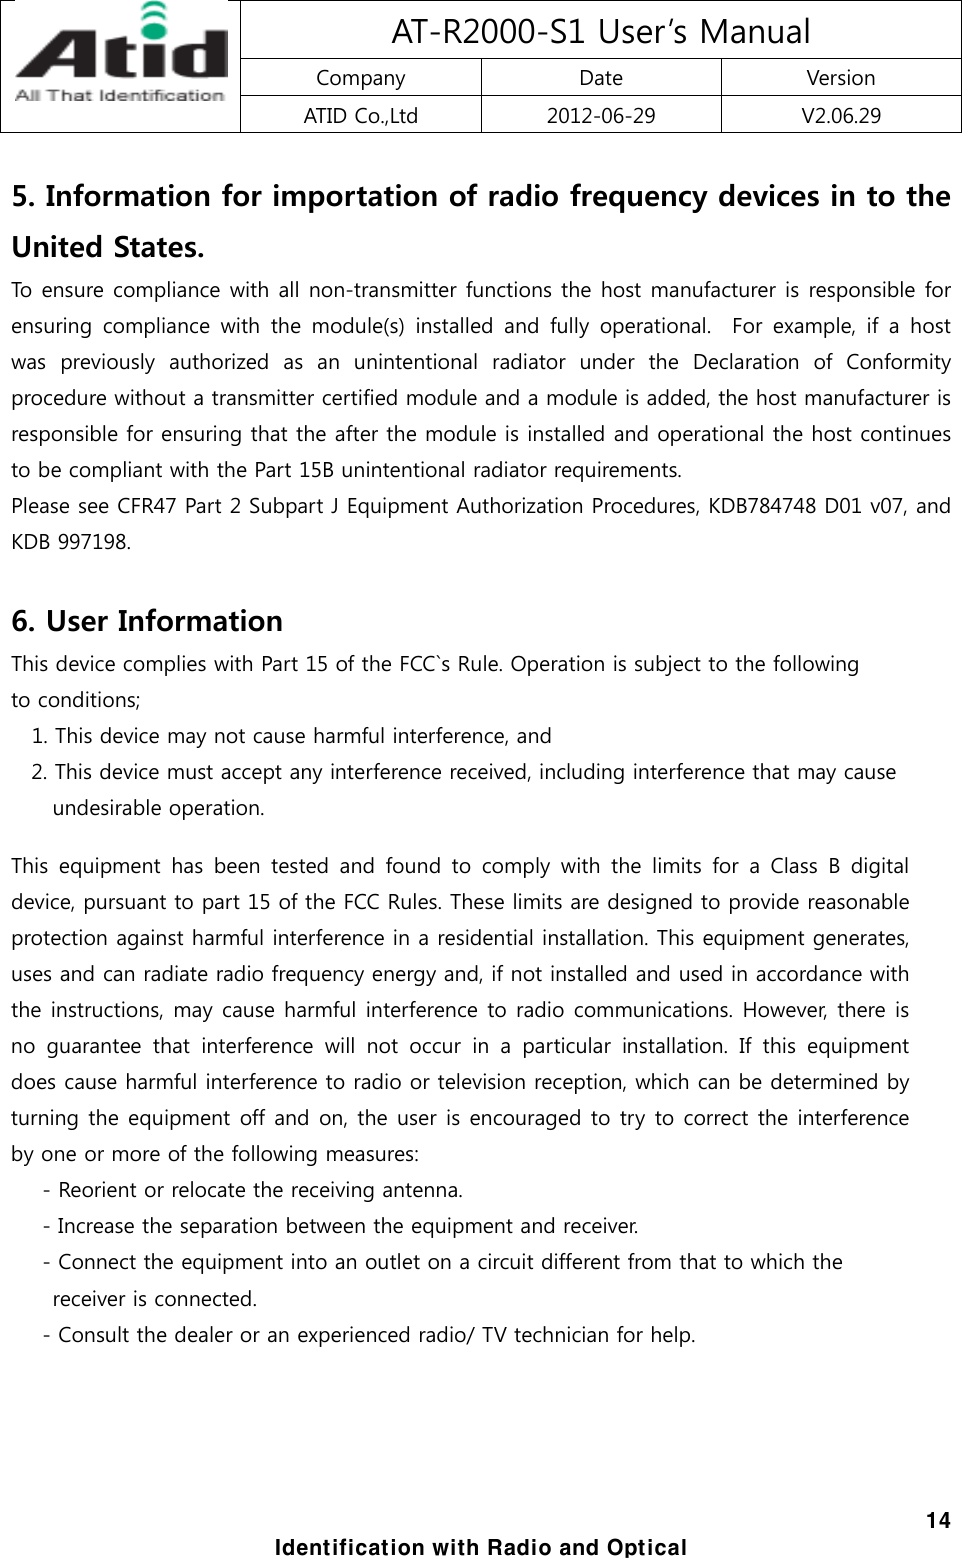 AT-R2000-S1 User’s Manual Company  Date  Version ATID Co.,Ltd  2012-06-29  V2.06.29  14 Identification with Radio and Optical 5. Information for importation of radio frequency devices in to the United States. To ensure compliance with all non-transmitter functions the host manufacturer is responsible for ensuring  compliance  with  the  module(s)  installed  and  fully  operational.    For  example,  if  a  host was  previously  authorized  as  an  unintentional  radiator  under  the  Declaration  of  Conformity procedure without a transmitter certified module and a module is added, the host manufacturer is responsible for ensuring that the after the module is installed and operational the host continues to be compliant with the Part 15B unintentional radiator requirements. Please see CFR47 Part 2 Subpart J Equipment Authorization Procedures, KDB784748 D01 v07, and KDB 997198.  6. User Information This device complies with Part 15 of the FCC`s Rule. Operation is subject to the following   to conditions;     1. This device may not cause harmful interference, and 2. This device must accept any interference received, including interference that may cause   undesirable operation.  This  equipment  has  been  tested  and  found  to  comply  with  the  limits  for  a  Class  B  digital device, pursuant to part 15 of the FCC Rules. These limits are designed to provide reasonable protection against harmful interference in a residential installation. This equipment generates, uses and can radiate radio frequency energy and, if not installed and used in accordance with the instructions, may cause harmful interference to radio communications. However, there is no  guarantee  that  interference  will  not  occur  in  a  particular  installation.  If  this  equipment does cause harmful interference to radio or television reception, which can be determined by turning the equipment off and on, the user is encouraged to try to correct the interference by one or more of the following measures:                - Reorient or relocate the receiving antenna.            - Increase the separation between the equipment and receiver.            - Connect the equipment into an outlet on a circuit different from that to which the   receiver is connected.         - Consult the dealer or an experienced radio/ TV technician for help.   